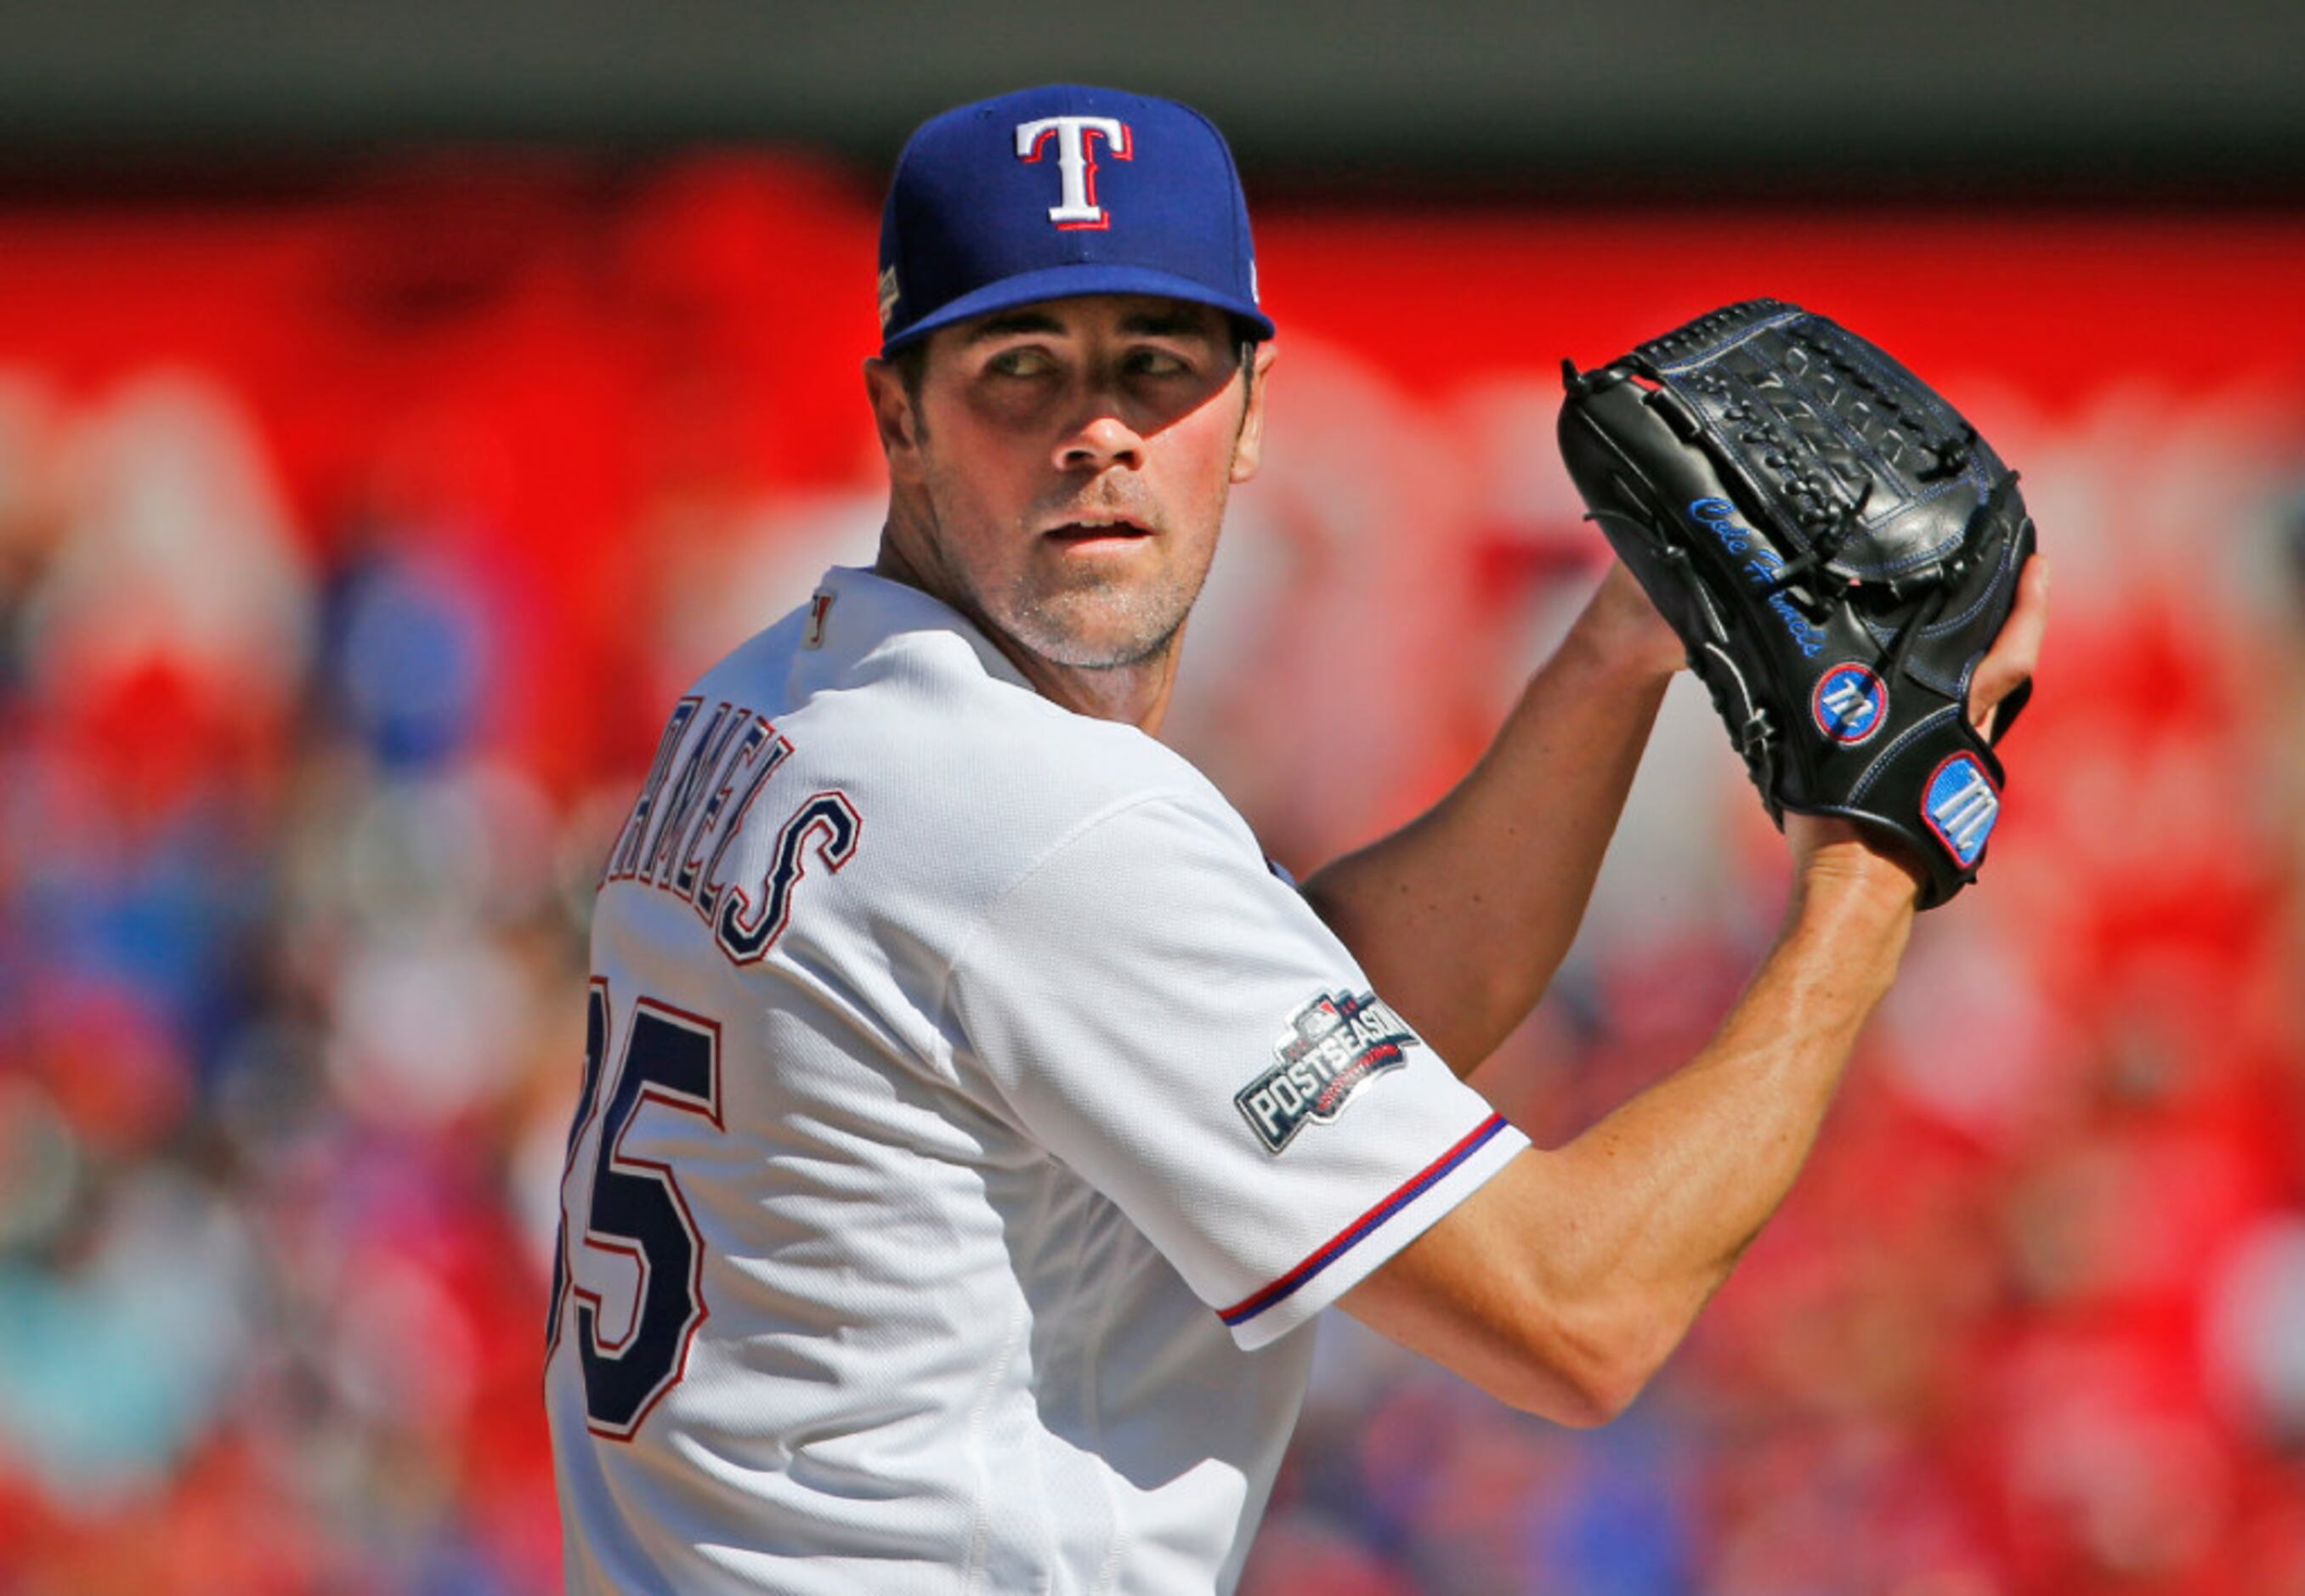 Texas Rangers: Cole Hamels Looks To Stay On Track